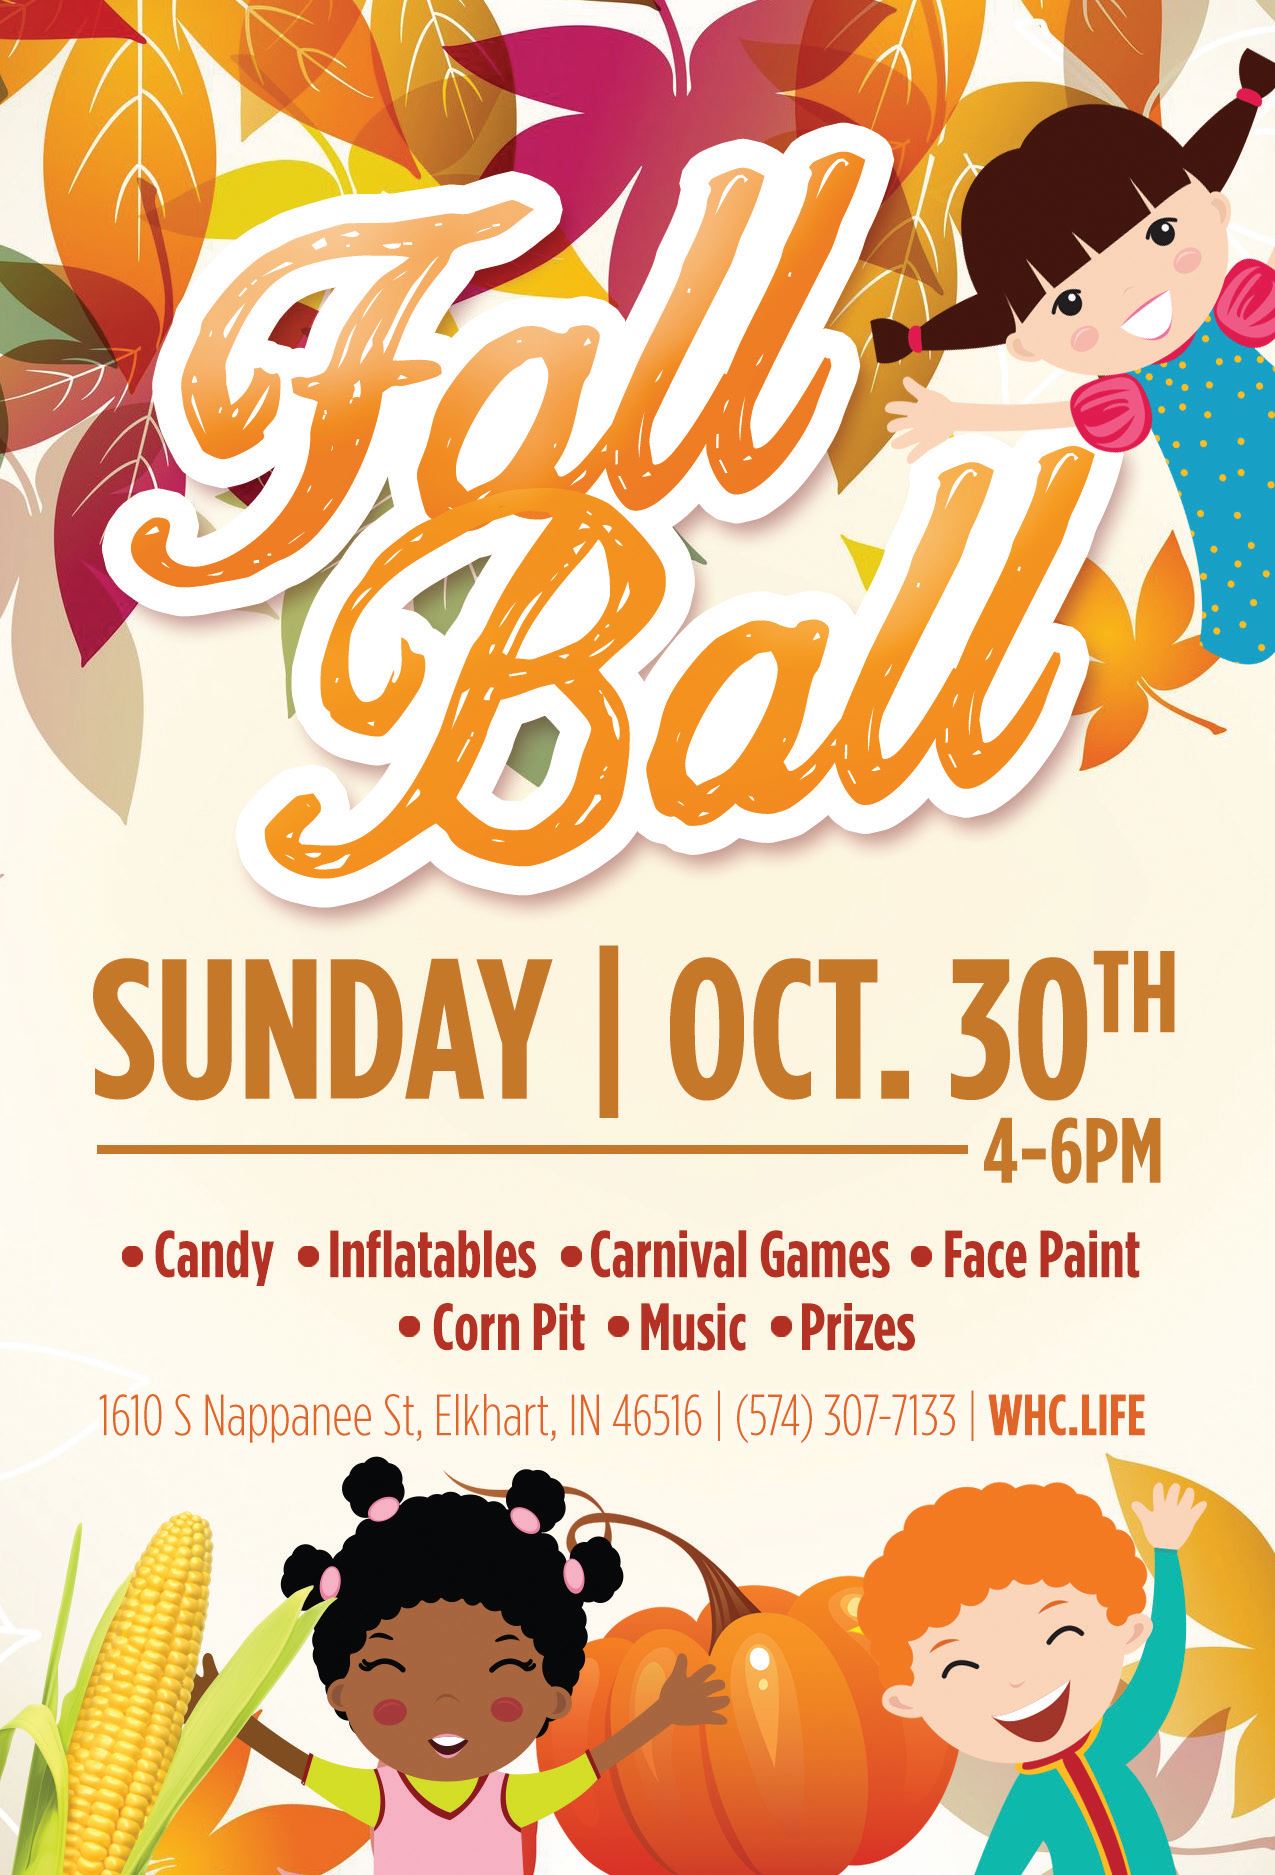 Fall Ball | Sunday, October 30th, 4-6pm | Candy - Inflatables - Carnival Games - Face Paint - Corn Pit - Music - Prizes | 1610 S. Nappanee St., Elkhart, Indiana 46516 - (574) 307-7133 - whc.life